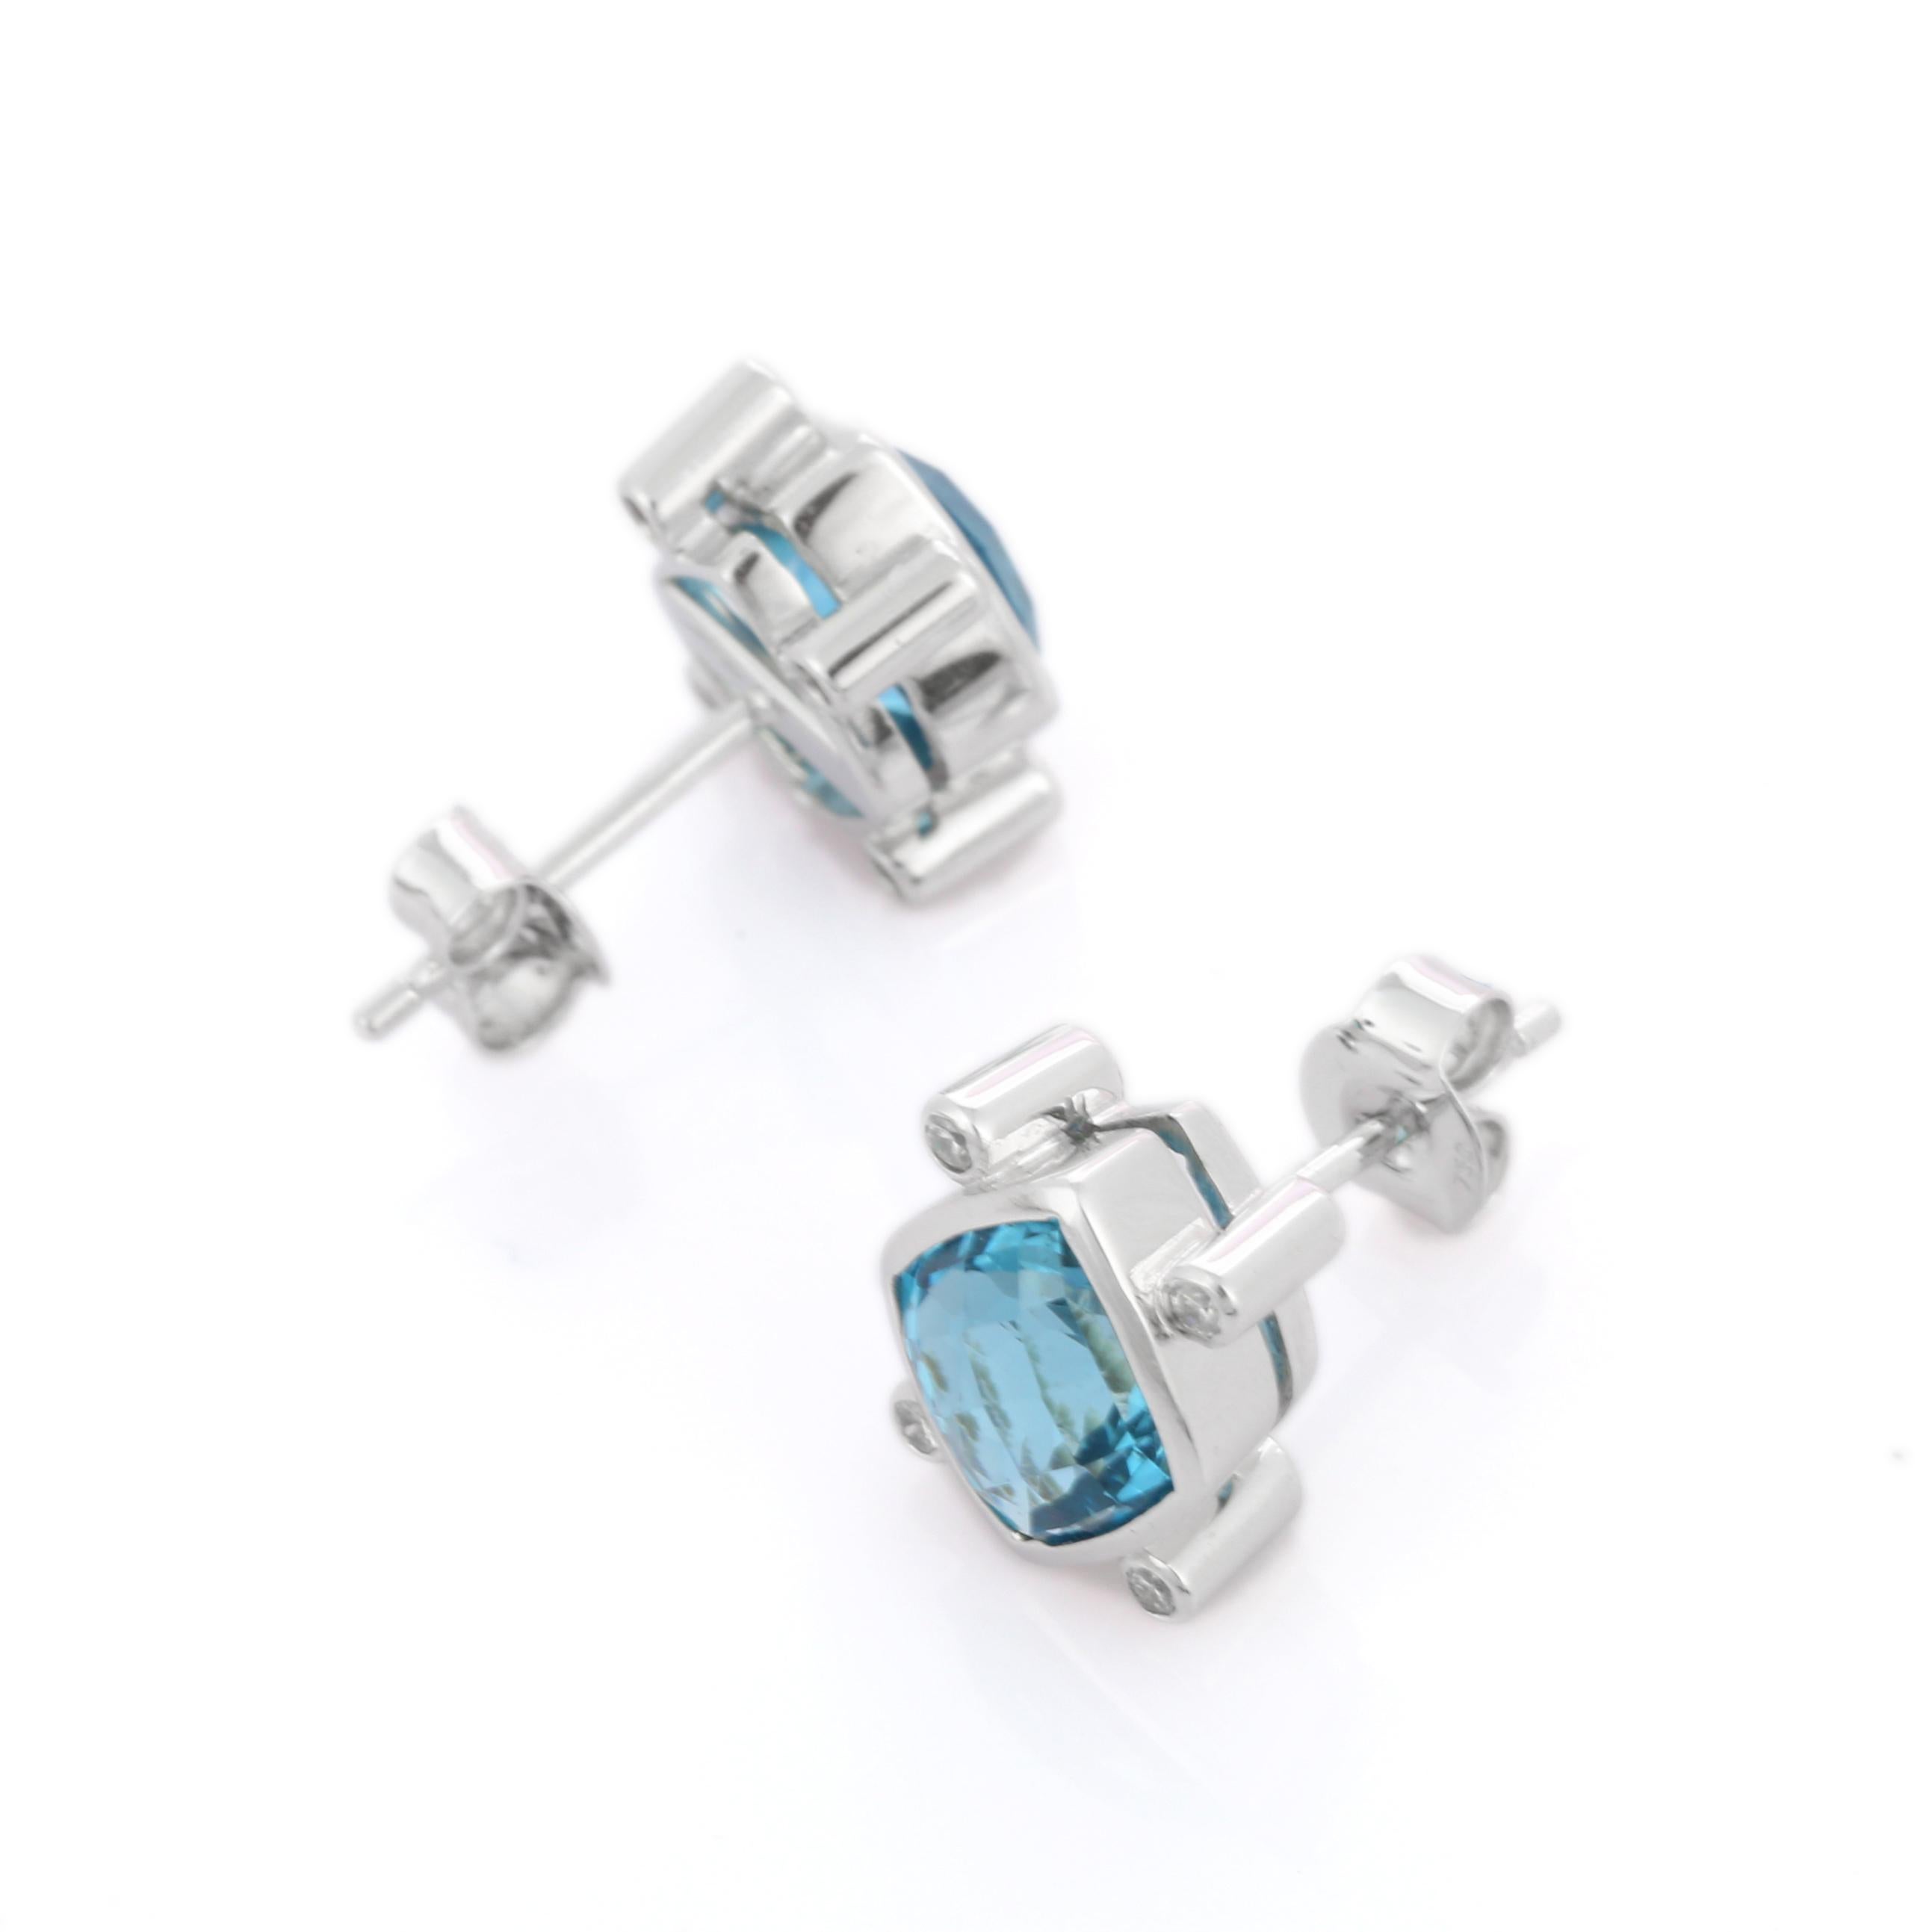 Fancy cut Blue Topaz studs with diamonds in 18K gold. Embrace your look with these stunning pair of earrings suitable for any occasion to complete your outfit.
Studs create a subtle beauty while showcasing the colors of the natural precious